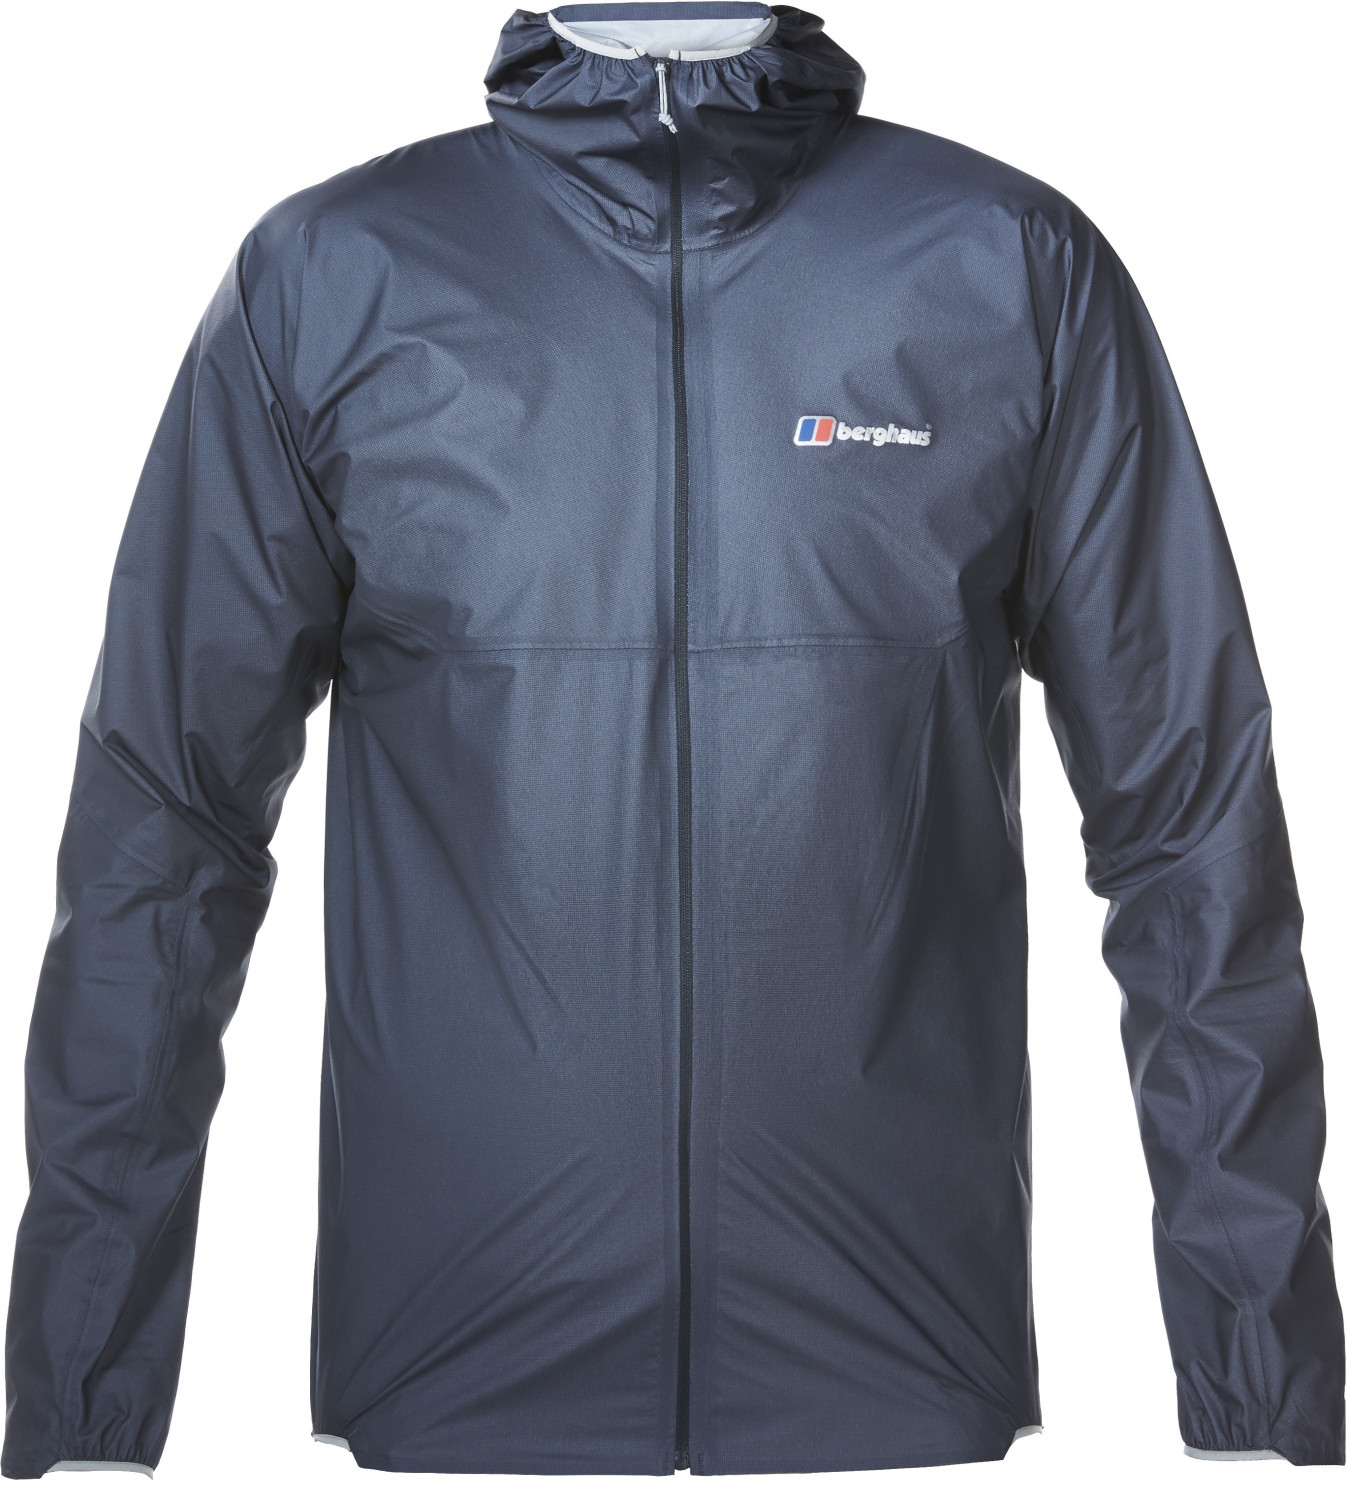 Buy Berghaus Hyper 100 Jacket carbon c14 from £175.00 (Today) – Best ...